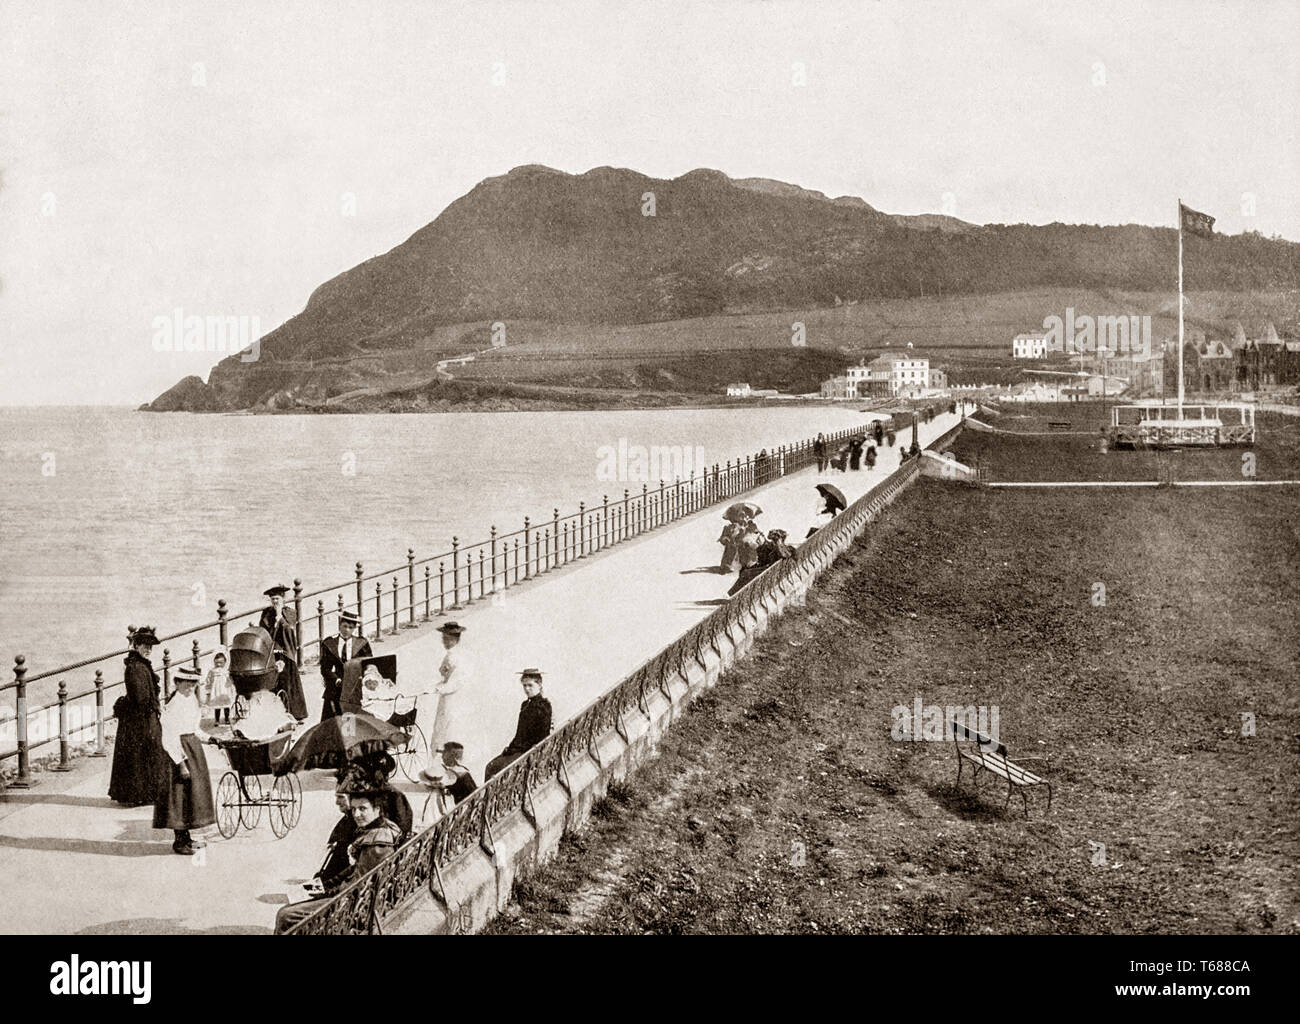 Late 19th Century view of the promenade in Bray, a coastal town in north County Wicklow, Ireland situated just south of Dublin on the east coast. When the Dublin and Kingstown Railway opened in 1834 and was extended as far as Bray in 1854. With the coming of the railway, the town grew to become a seaside resort with hotels and residential terraces built in the vicinity of the seafront. Stock Photo